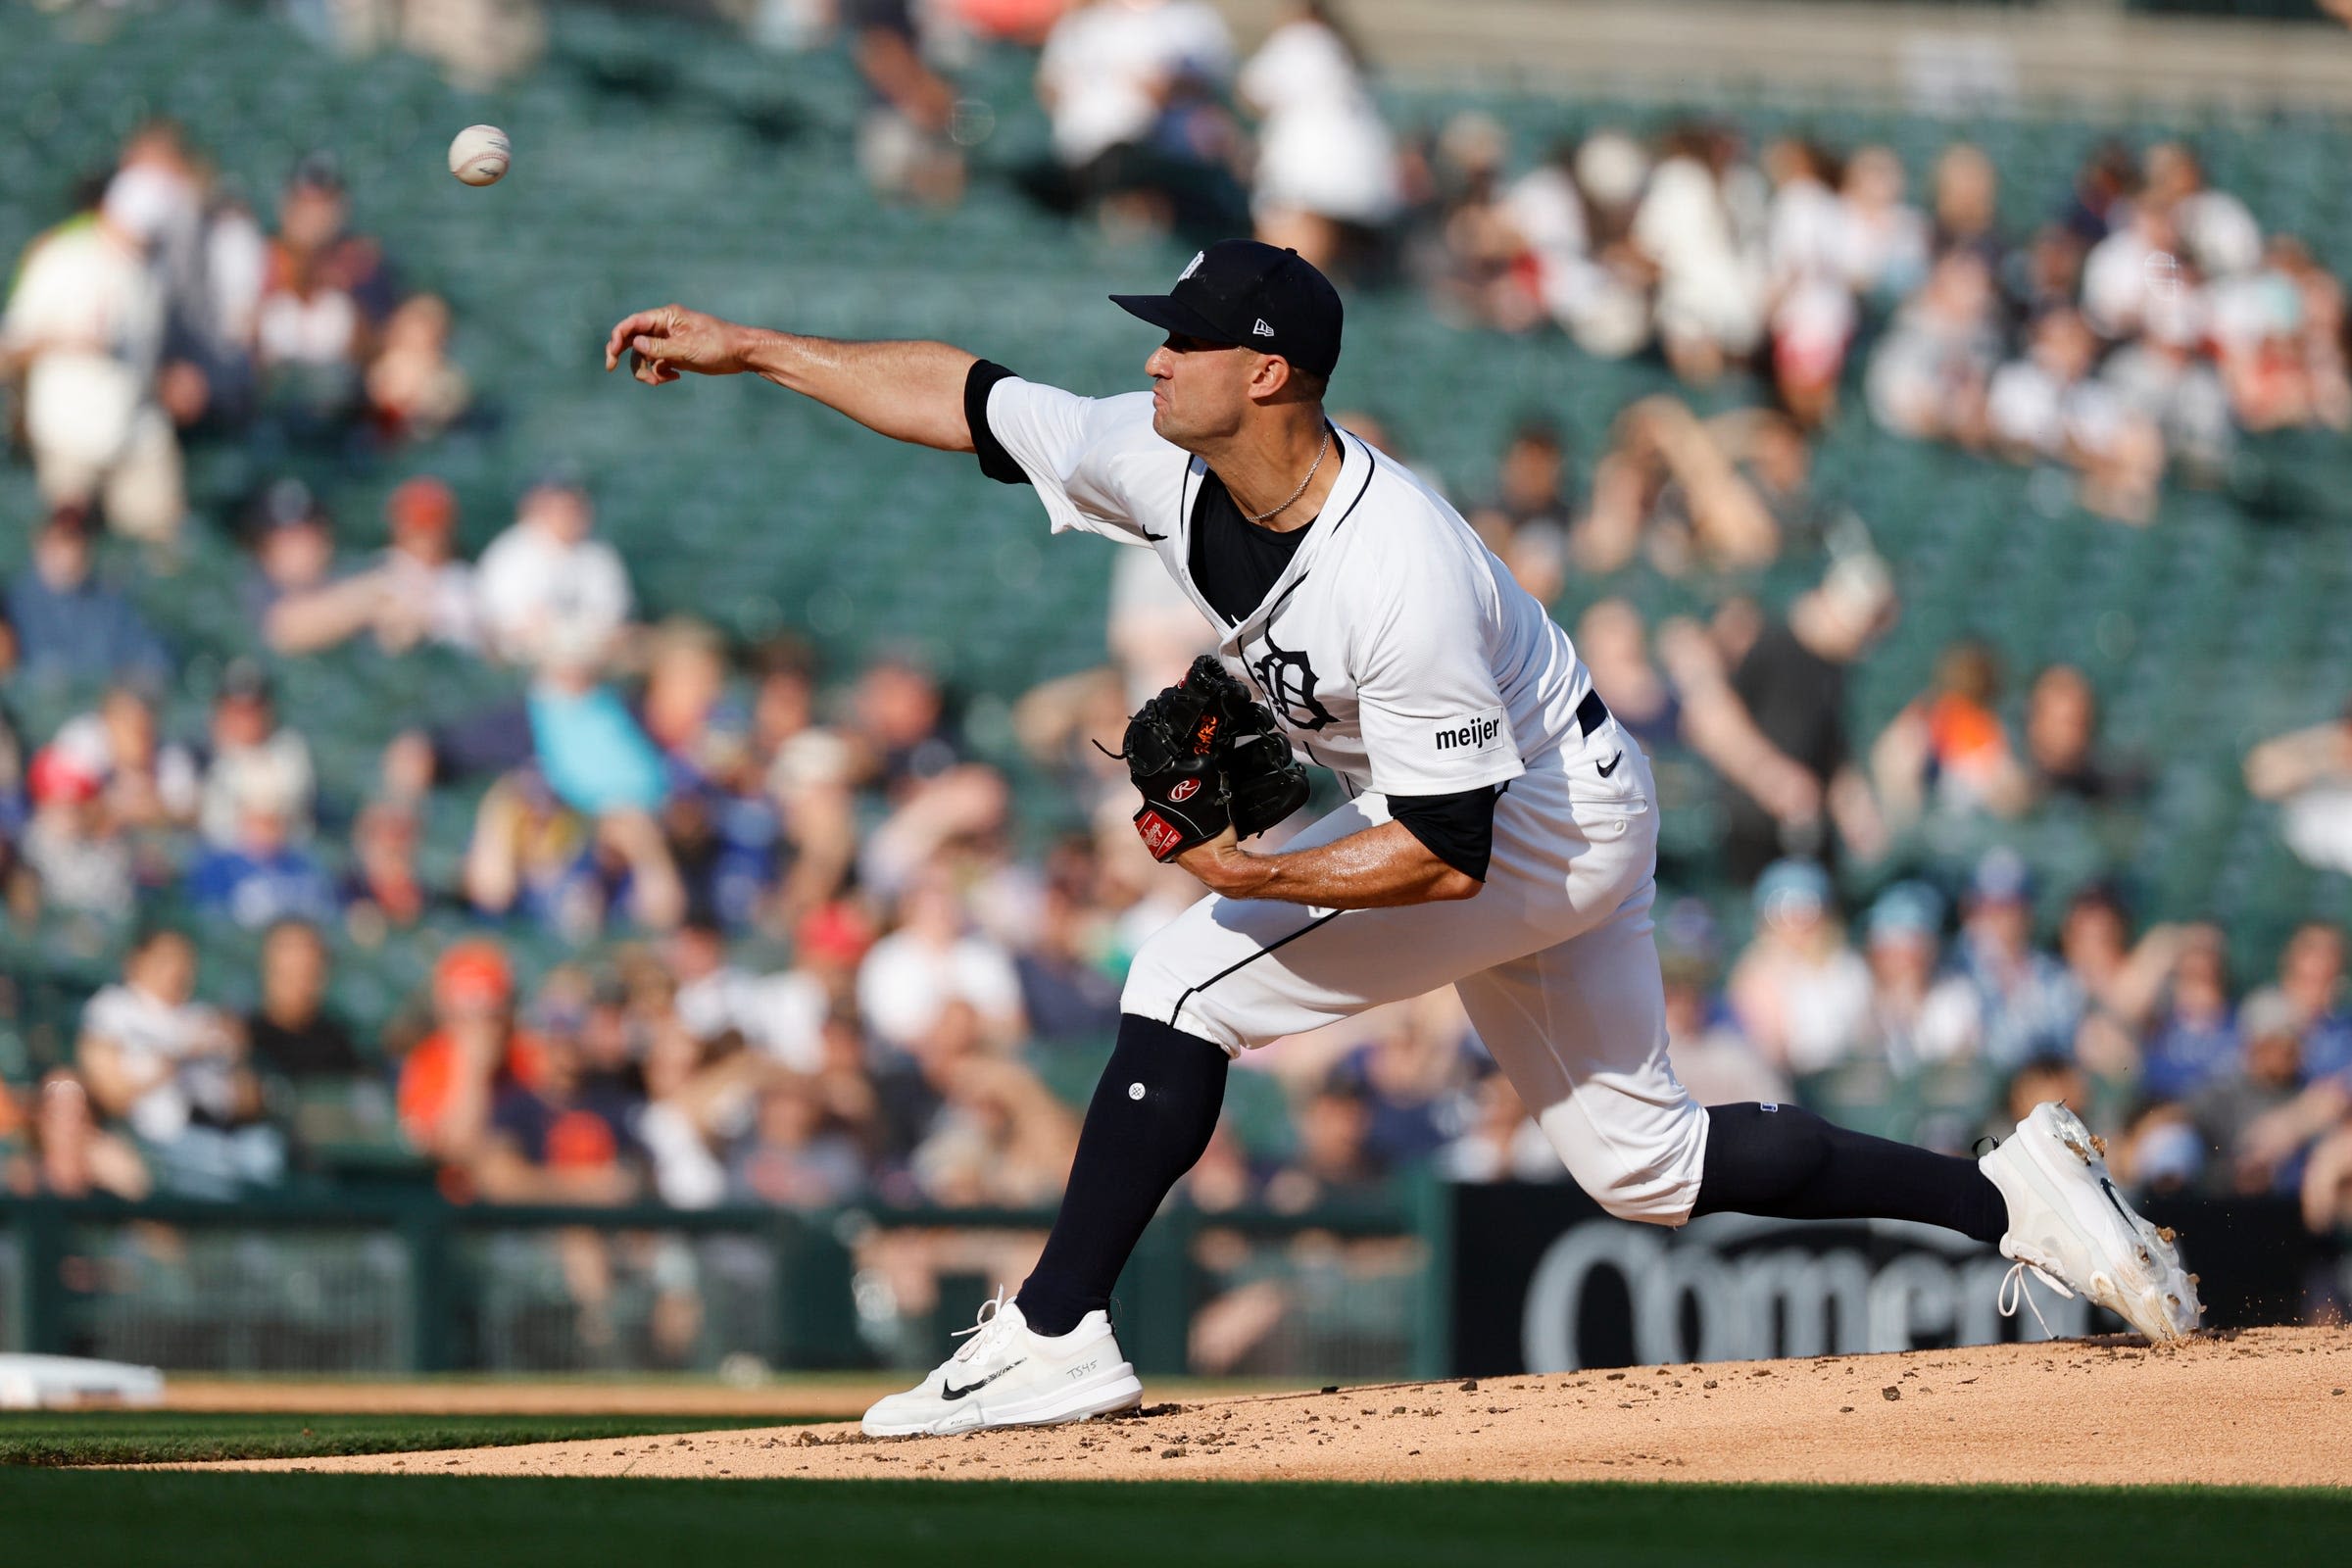 Detroit Tigers' offense, bullpen struggle again in 9-1 loss to Toronto Blue Jays